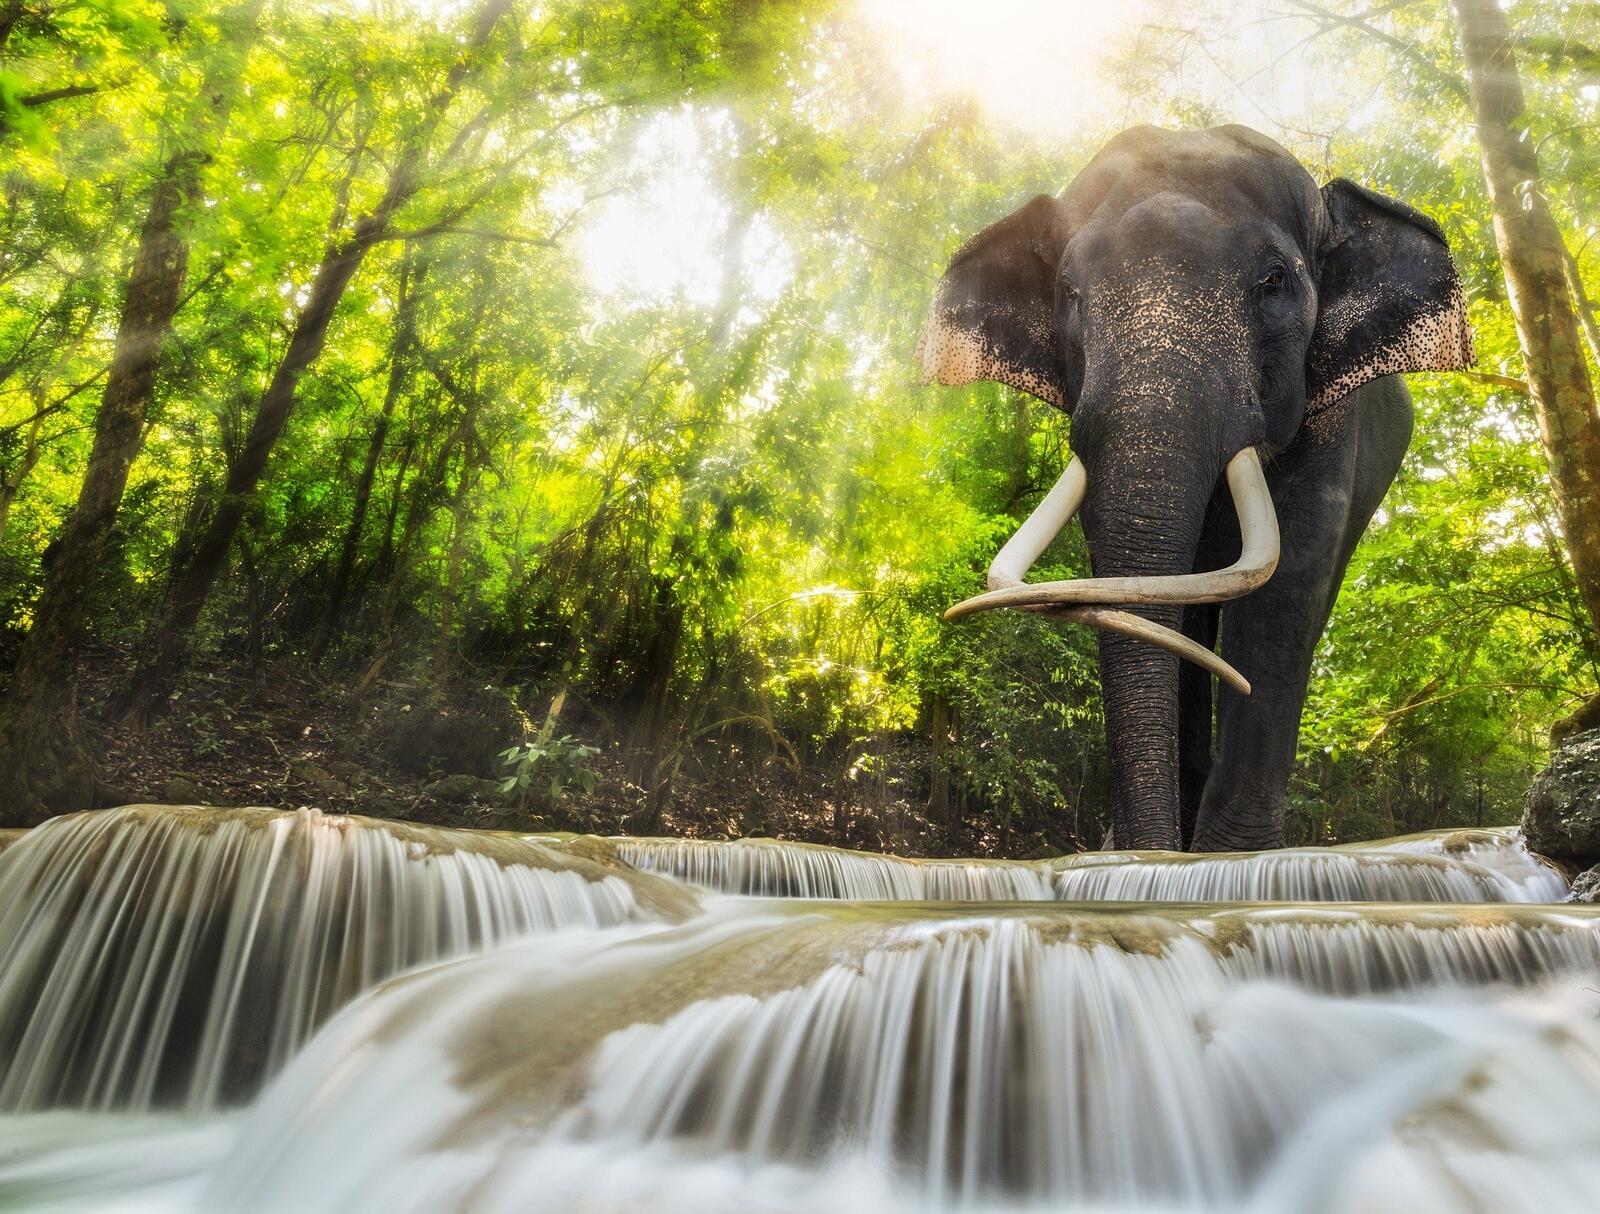 Free photo A large elephant with tusks in the summer forest near a waterfall